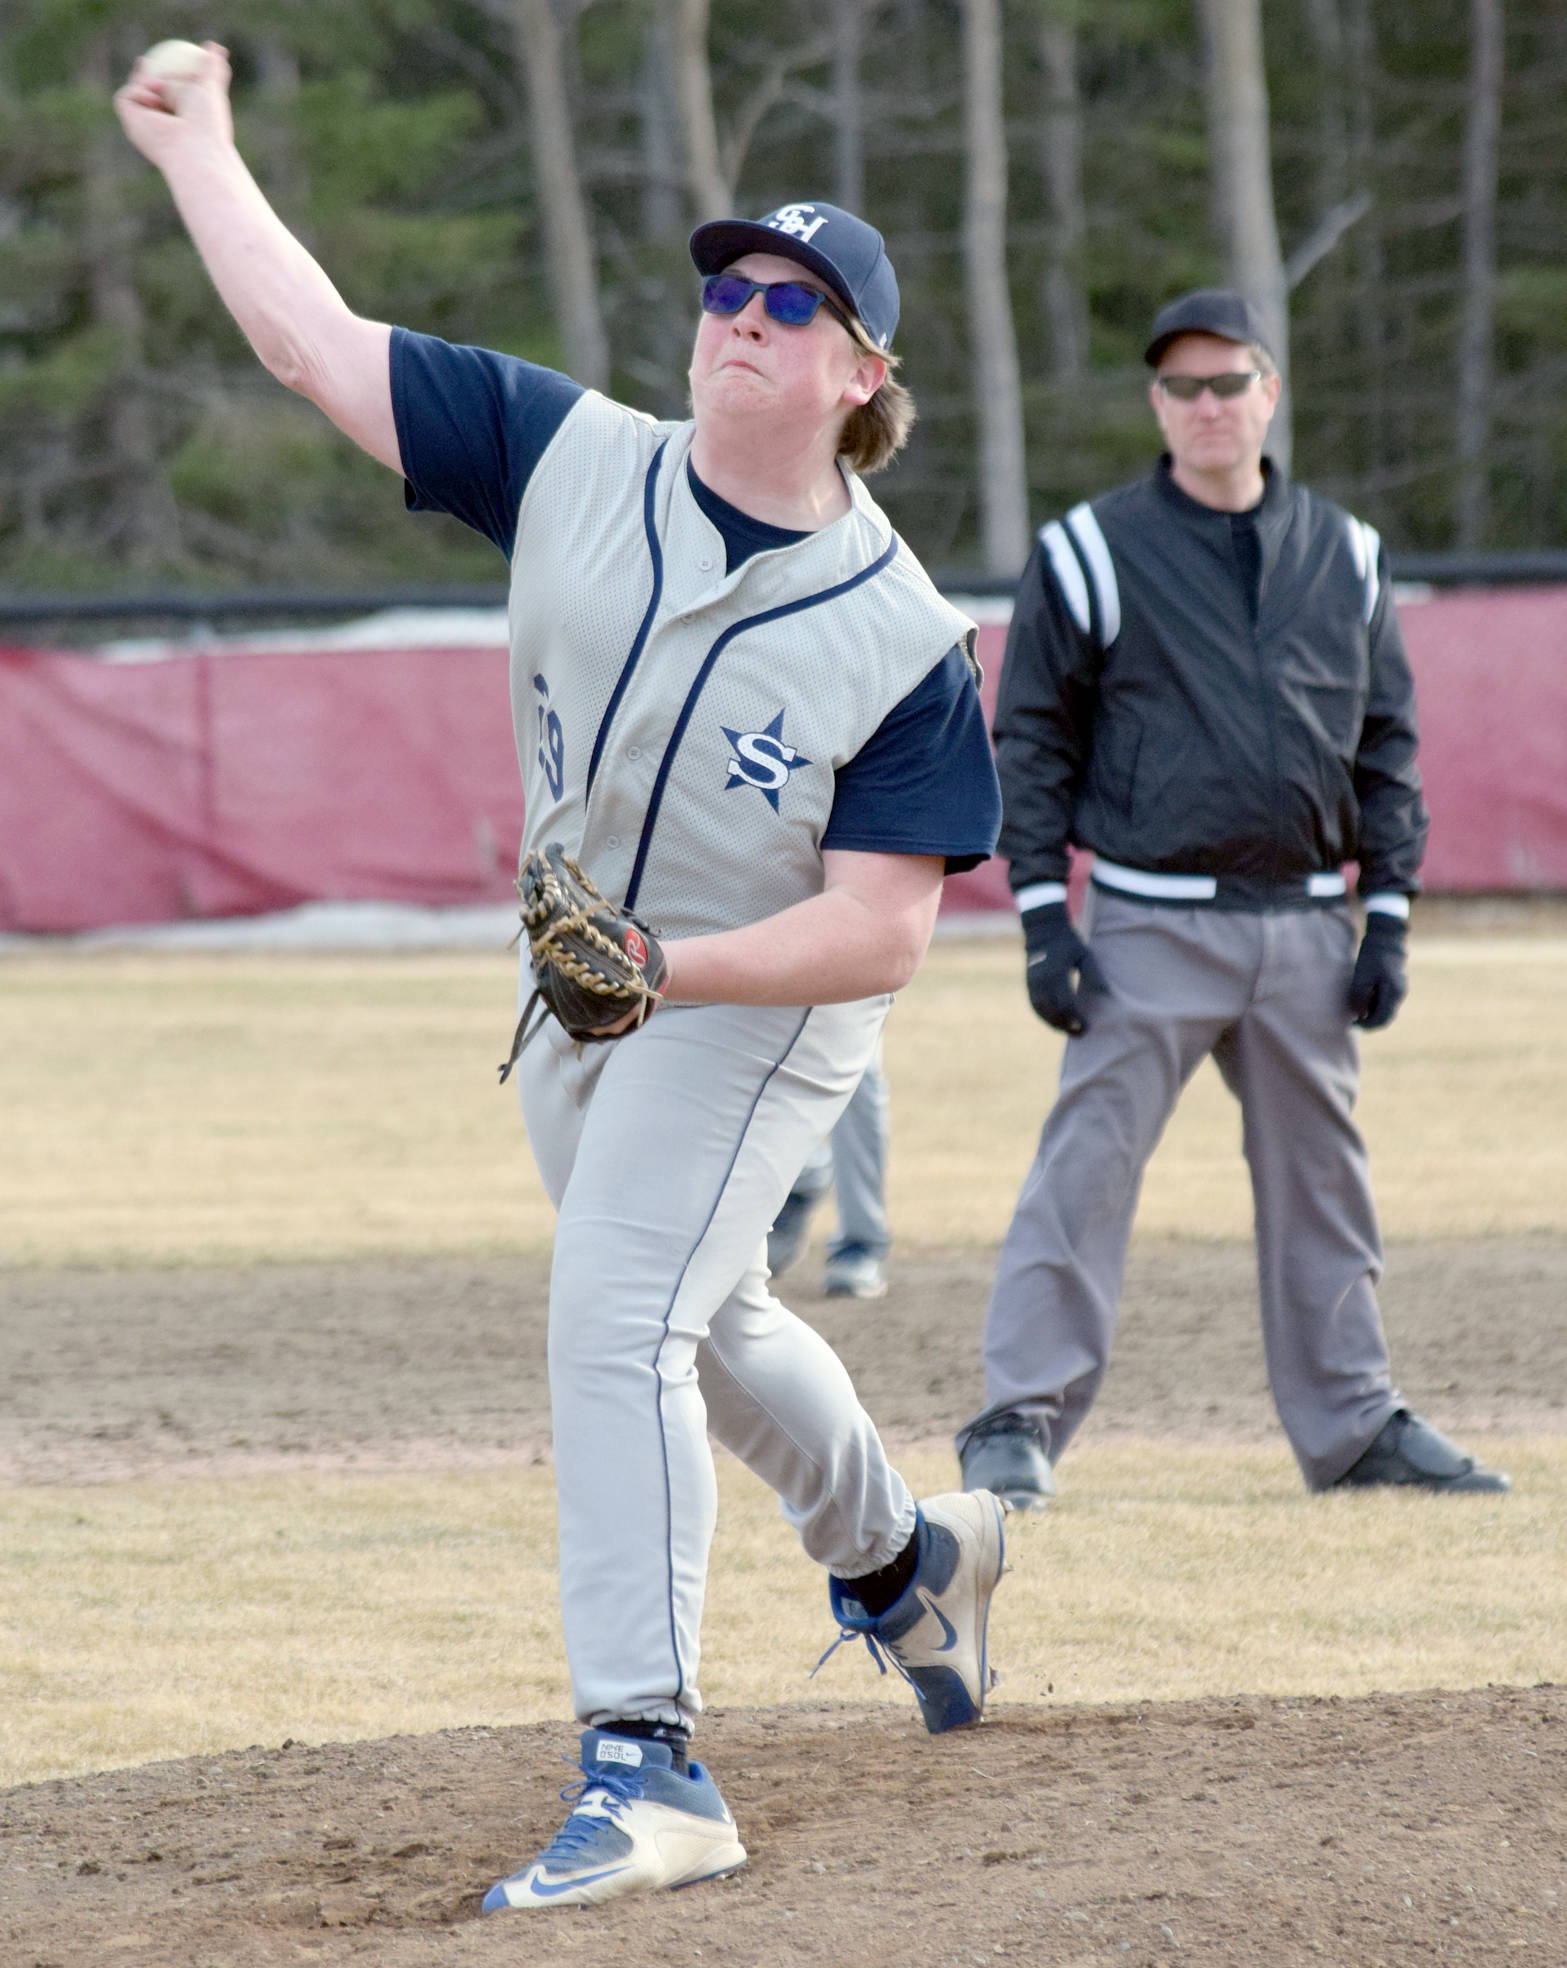 Jake Marcuson delivers to Kenai Central on Monday, May 7, 2018, at the Kenai Little League fields. (Photo by Jeff Helminiak/Peninsula Clarion)